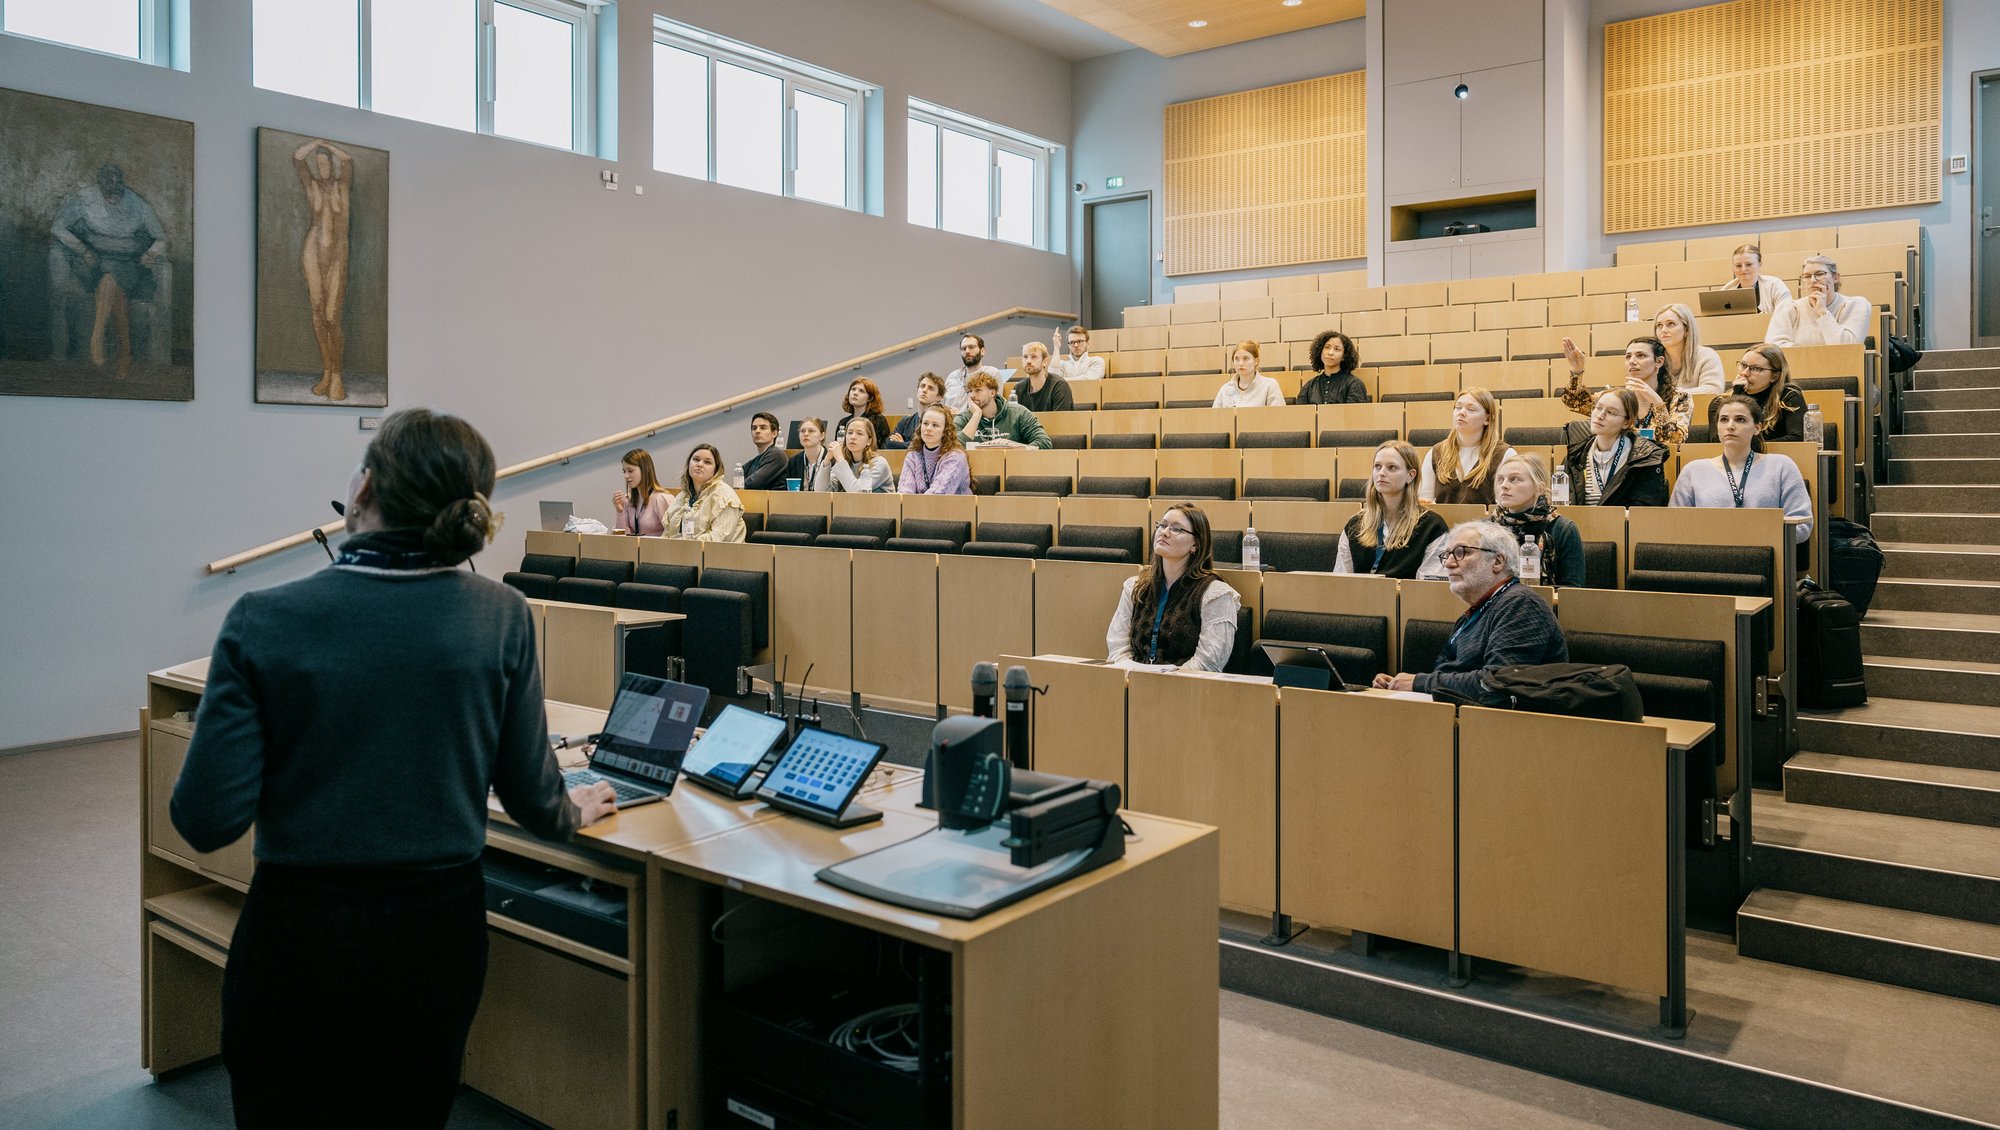 Throughout the day, a variety of pitches, flashtalks and oral sessions can be experienced around the faculty. Photo: Jens Hartmann Schmidt, AU Photo.